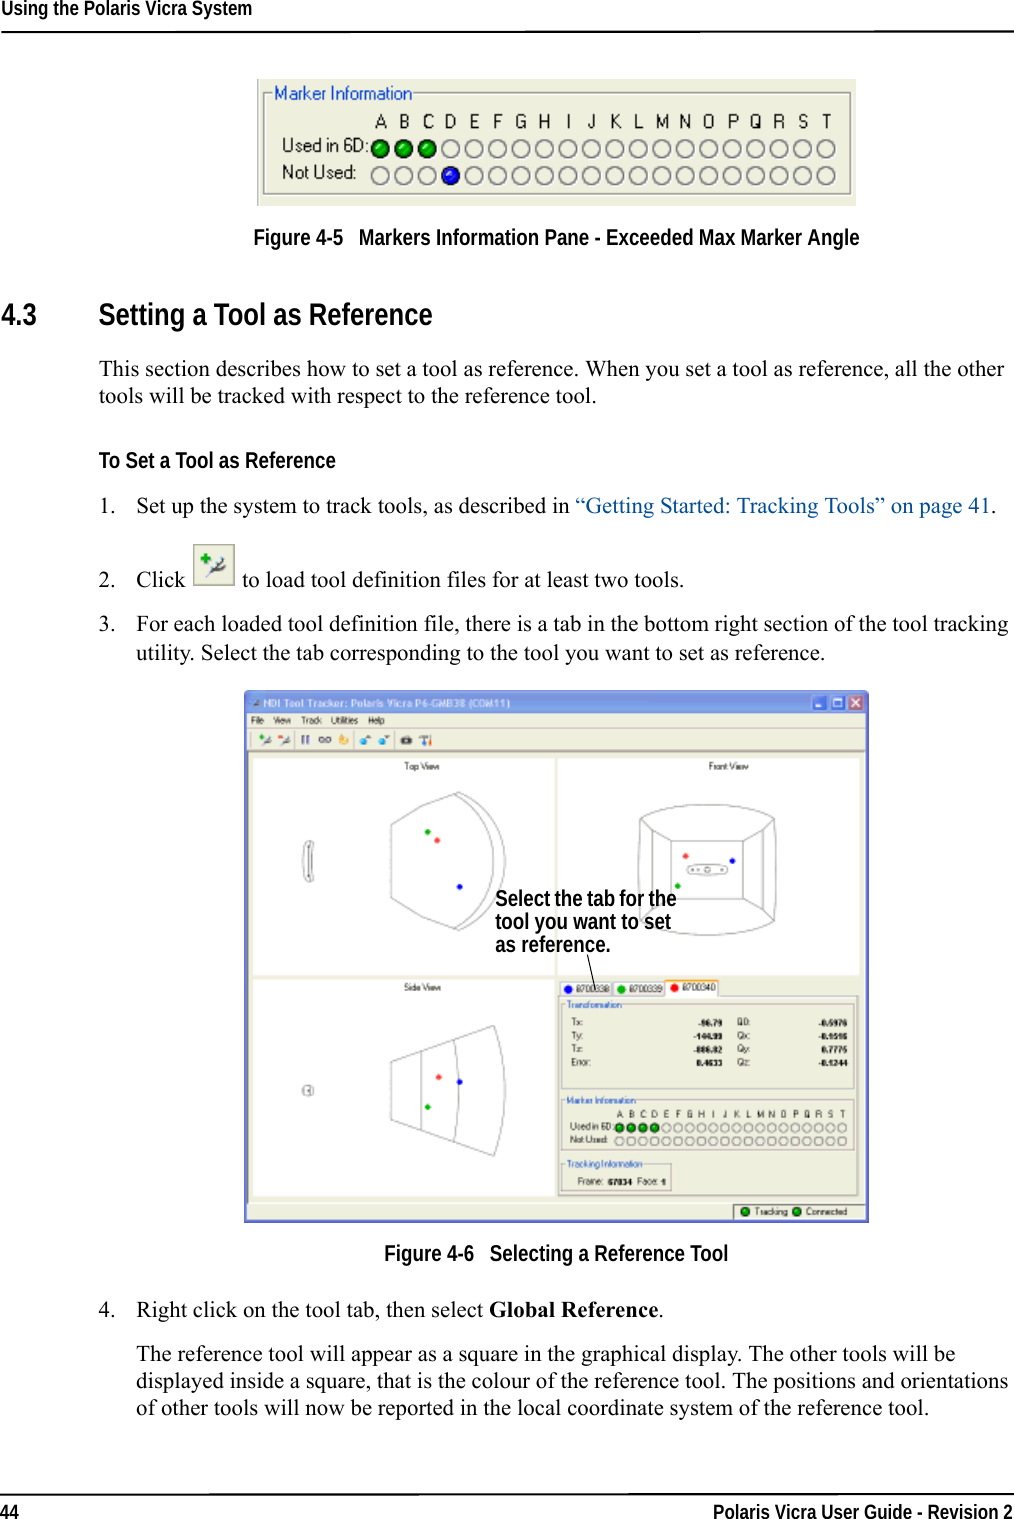 Using the Polaris Vicra System44 Polaris Vicra User Guide - Revision 2Figure 4-5   Markers Information Pane - Exceeded Max Marker Angle4.3 Setting a Tool as ReferenceThis section describes how to set a tool as reference. When you set a tool as reference, all the other tools will be tracked with respect to the reference tool.To Set a Tool as Reference1. Set up the system to track tools, as described in “Getting Started: Tracking Tools” on page 41.2. Click  to load tool definition files for at least two tools.3. For each loaded tool definition file, there is a tab in the bottom right section of the tool tracking utility. Select the tab corresponding to the tool you want to set as reference.Figure 4-6   Selecting a Reference Tool4. Right click on the tool tab, then select Global Reference.The reference tool will appear as a square in the graphical display. The other tools will be displayed inside a square, that is the colour of the reference tool. The positions and orientations of other tools will now be reported in the local coordinate system of the reference tool.Select the tab for the tool you want to set as reference.